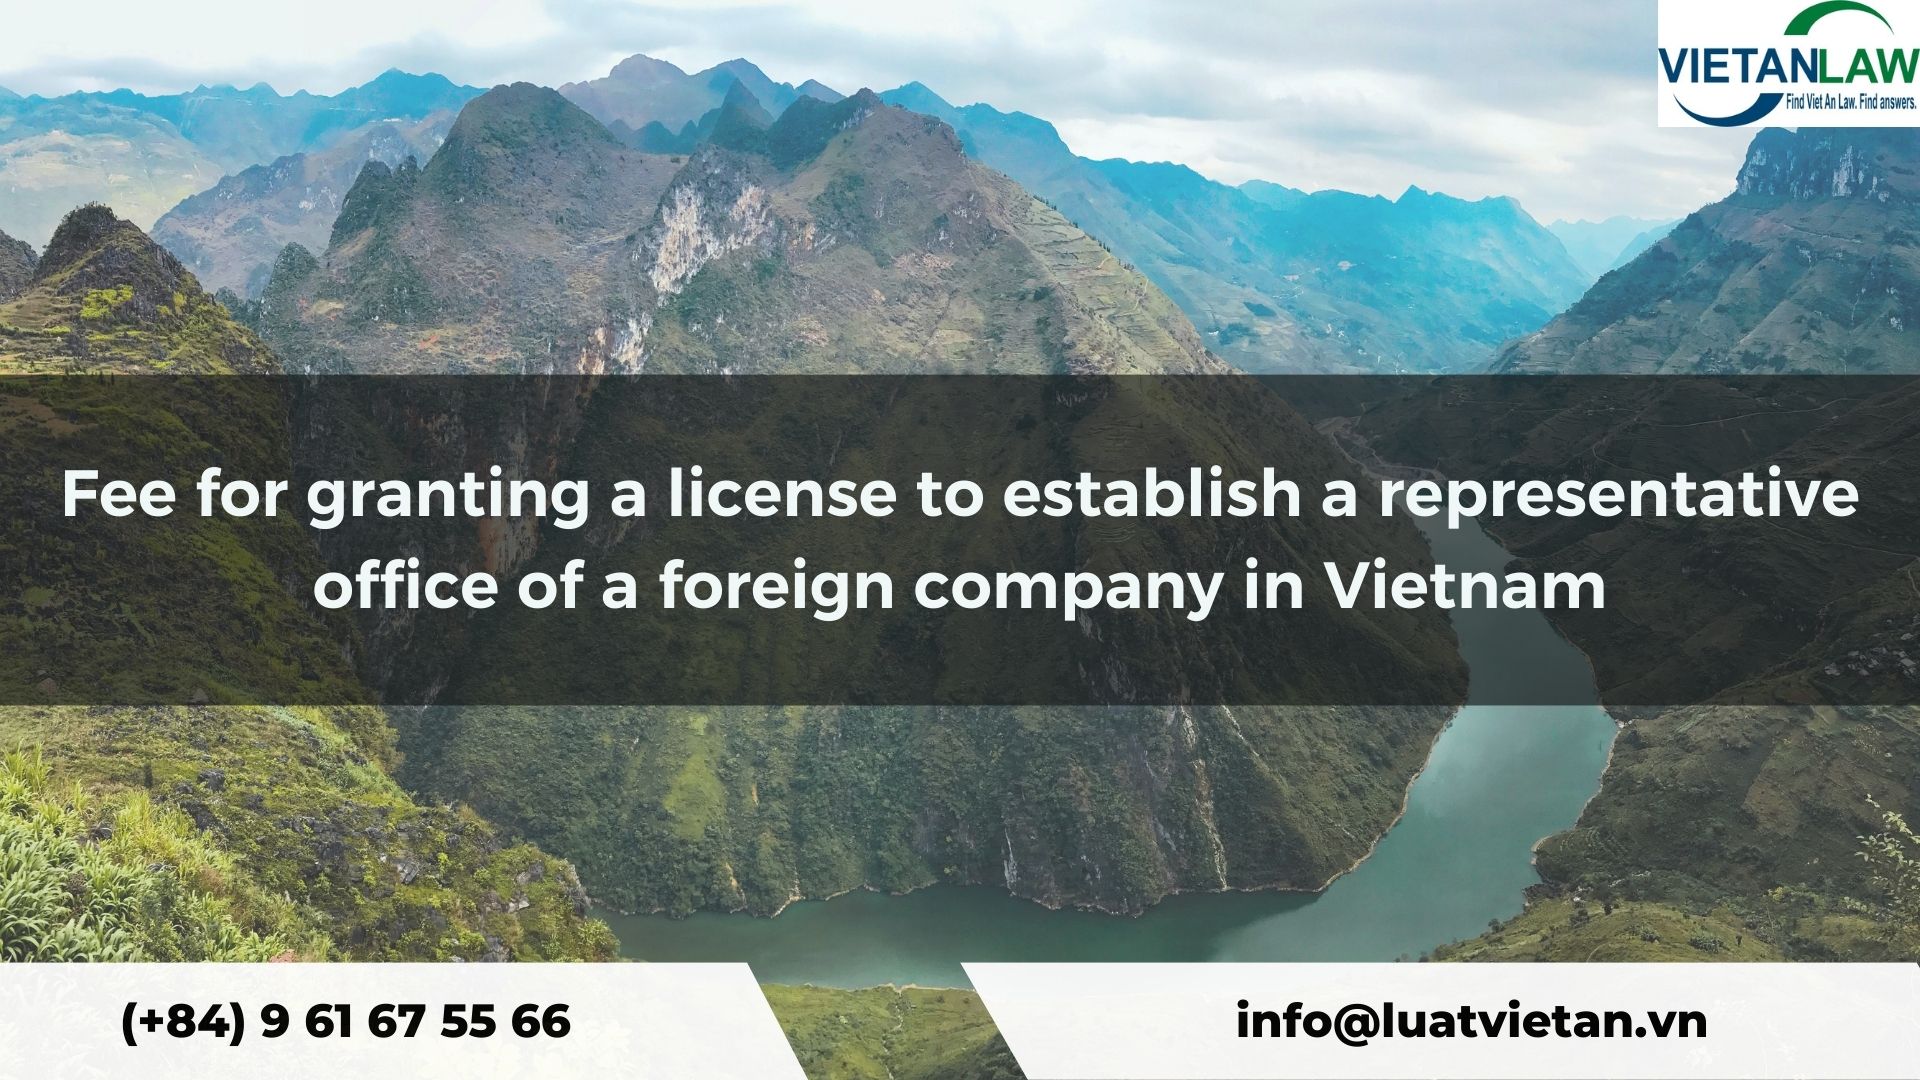 Fee for granting a license to establish a representative office of a foreign company in Vietnam